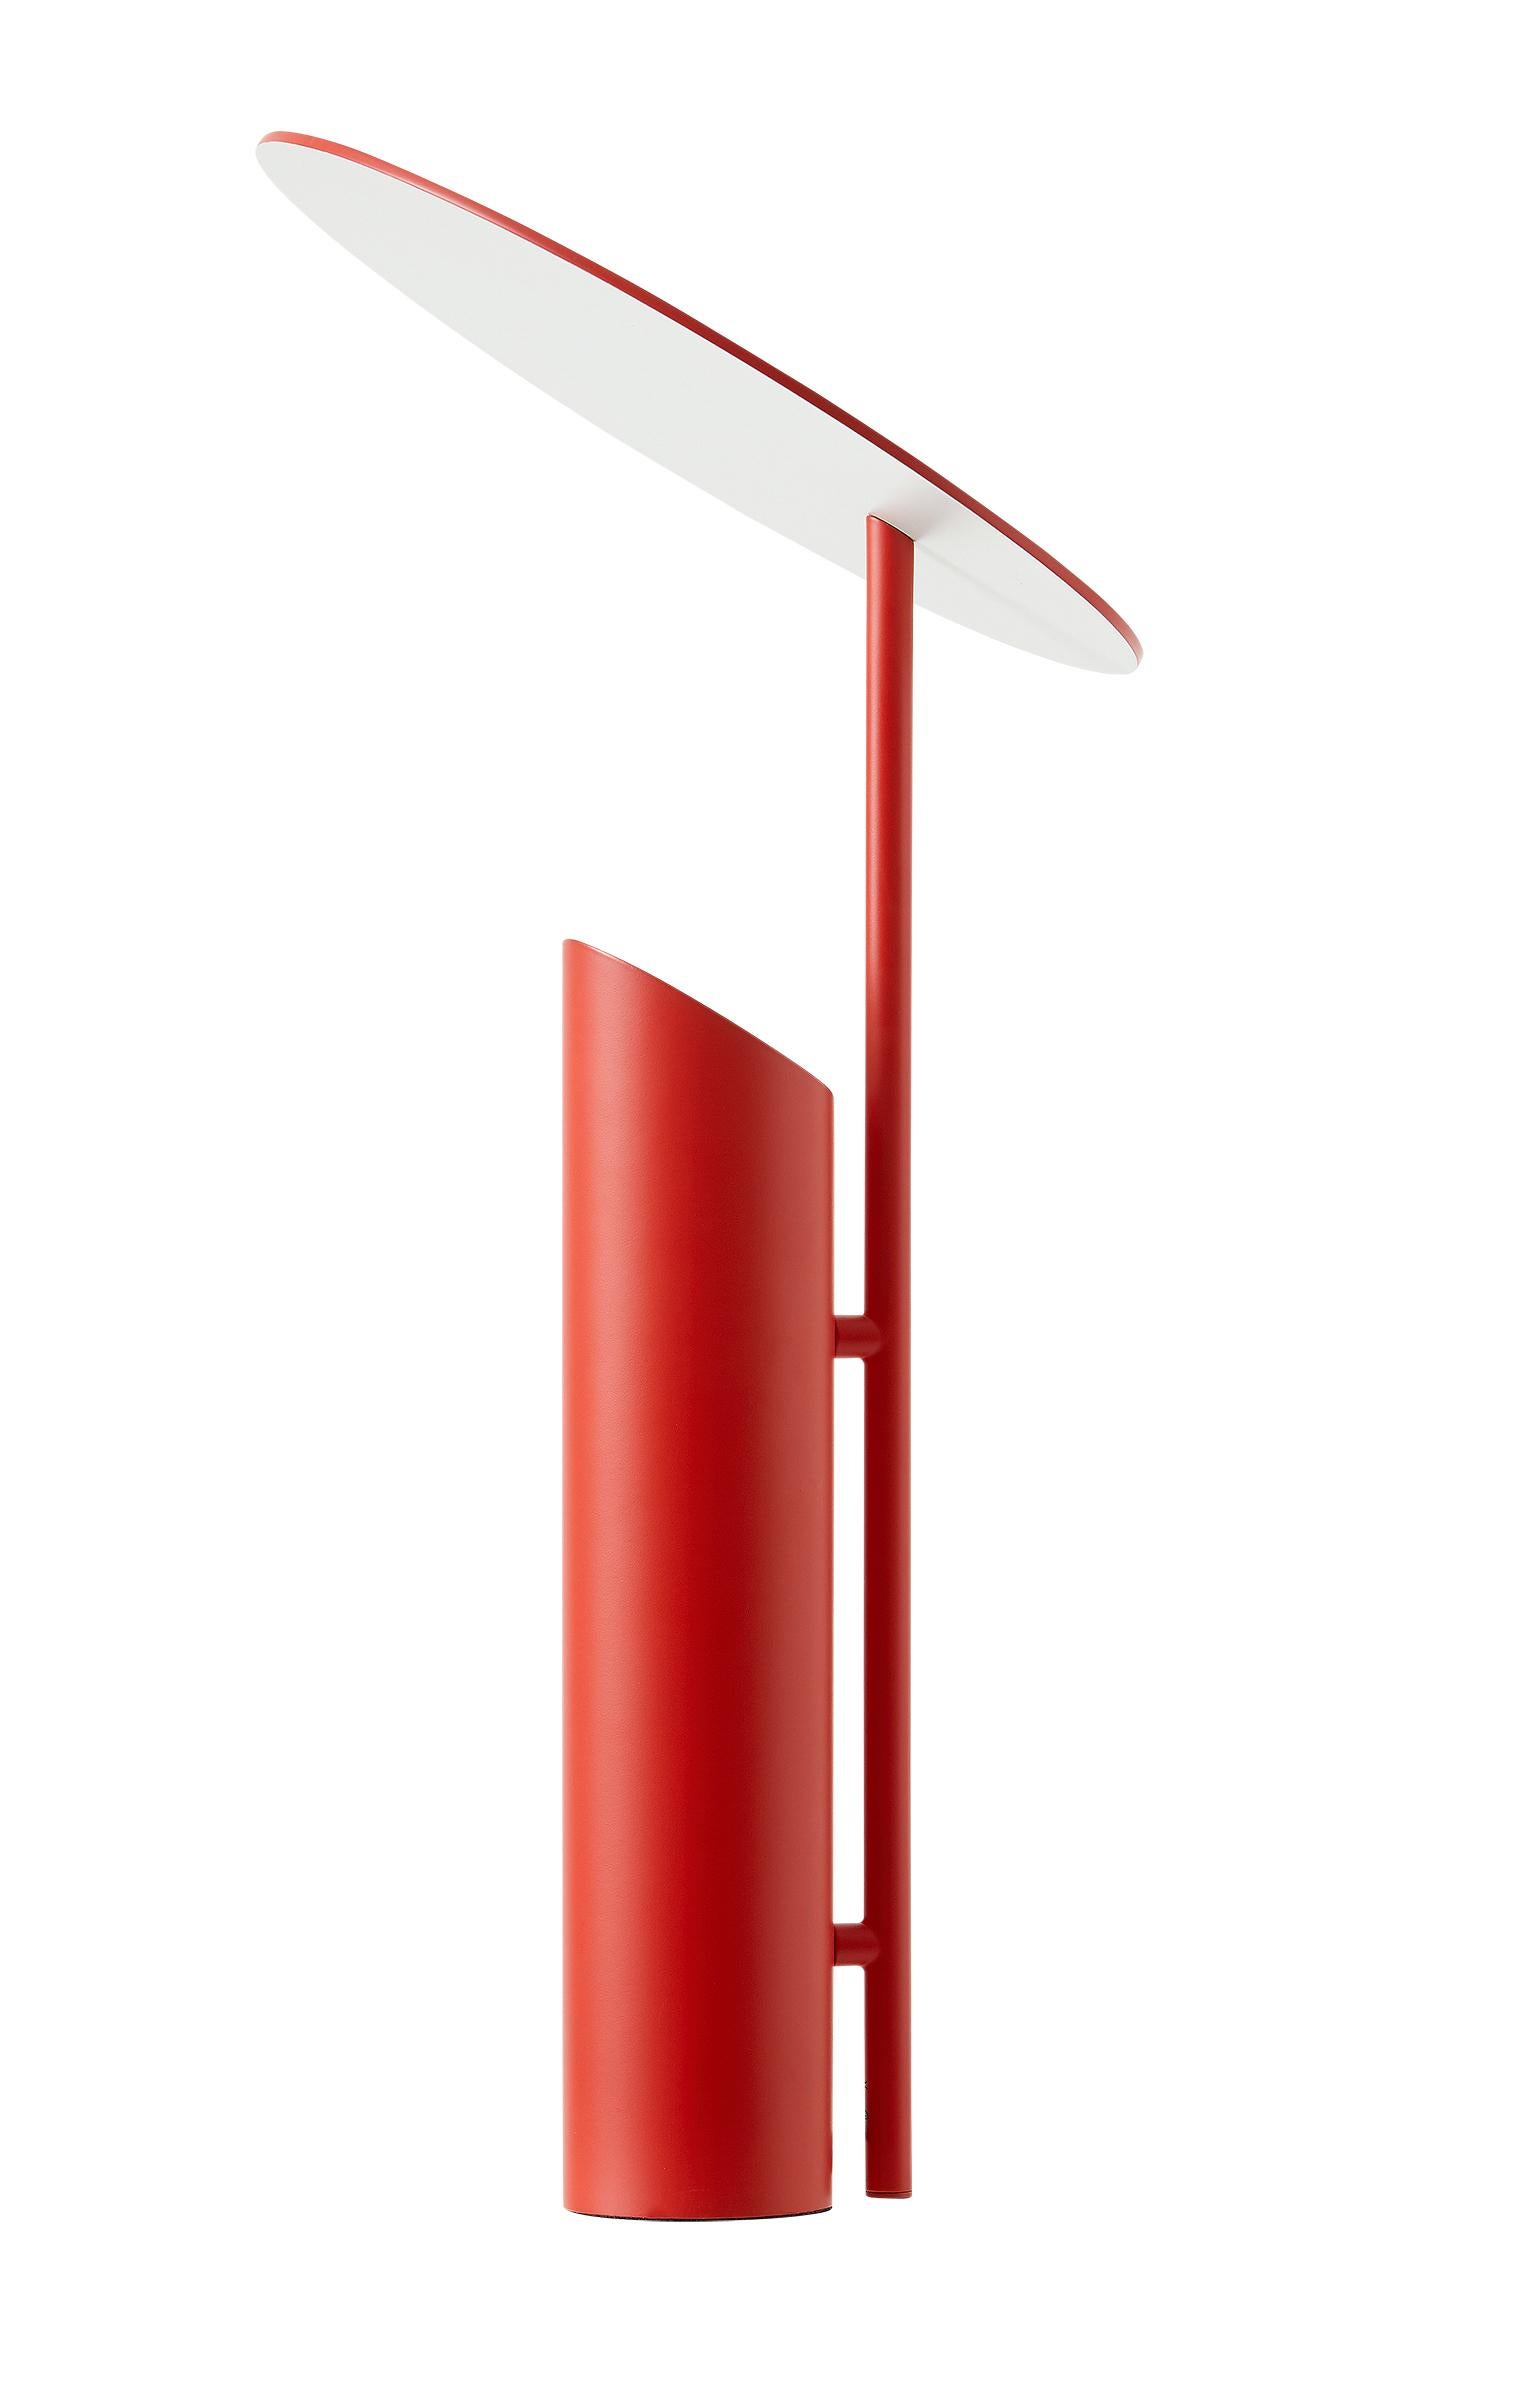 Table lamp with slanted disc shade which reflects the light coming from the base of the lamp (Light source facing upwards).

Material: 
All parts manufactured in steel 
Powder coated red
The down facing surface of disc shade powder coated white